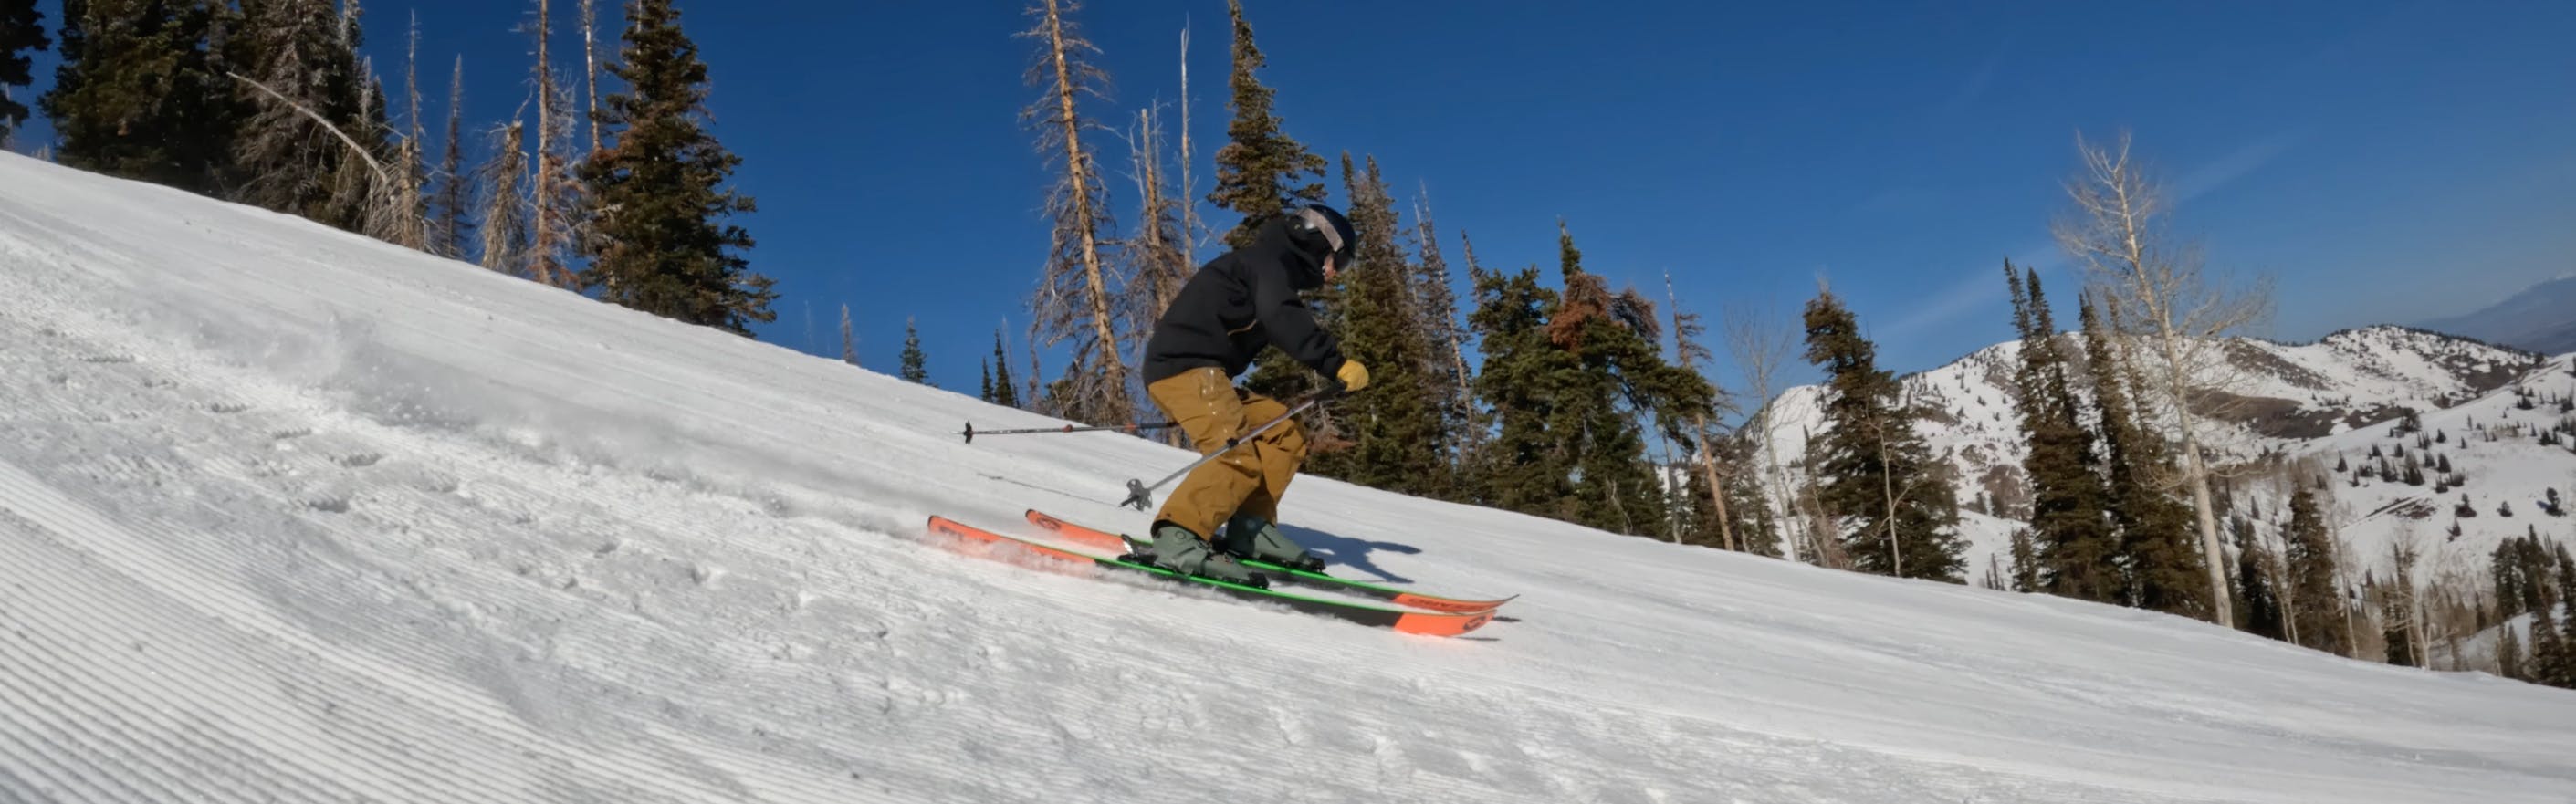 Ski Expert Theo carving on a groomed run with the 2023 Blizzard Rustler 9 skis